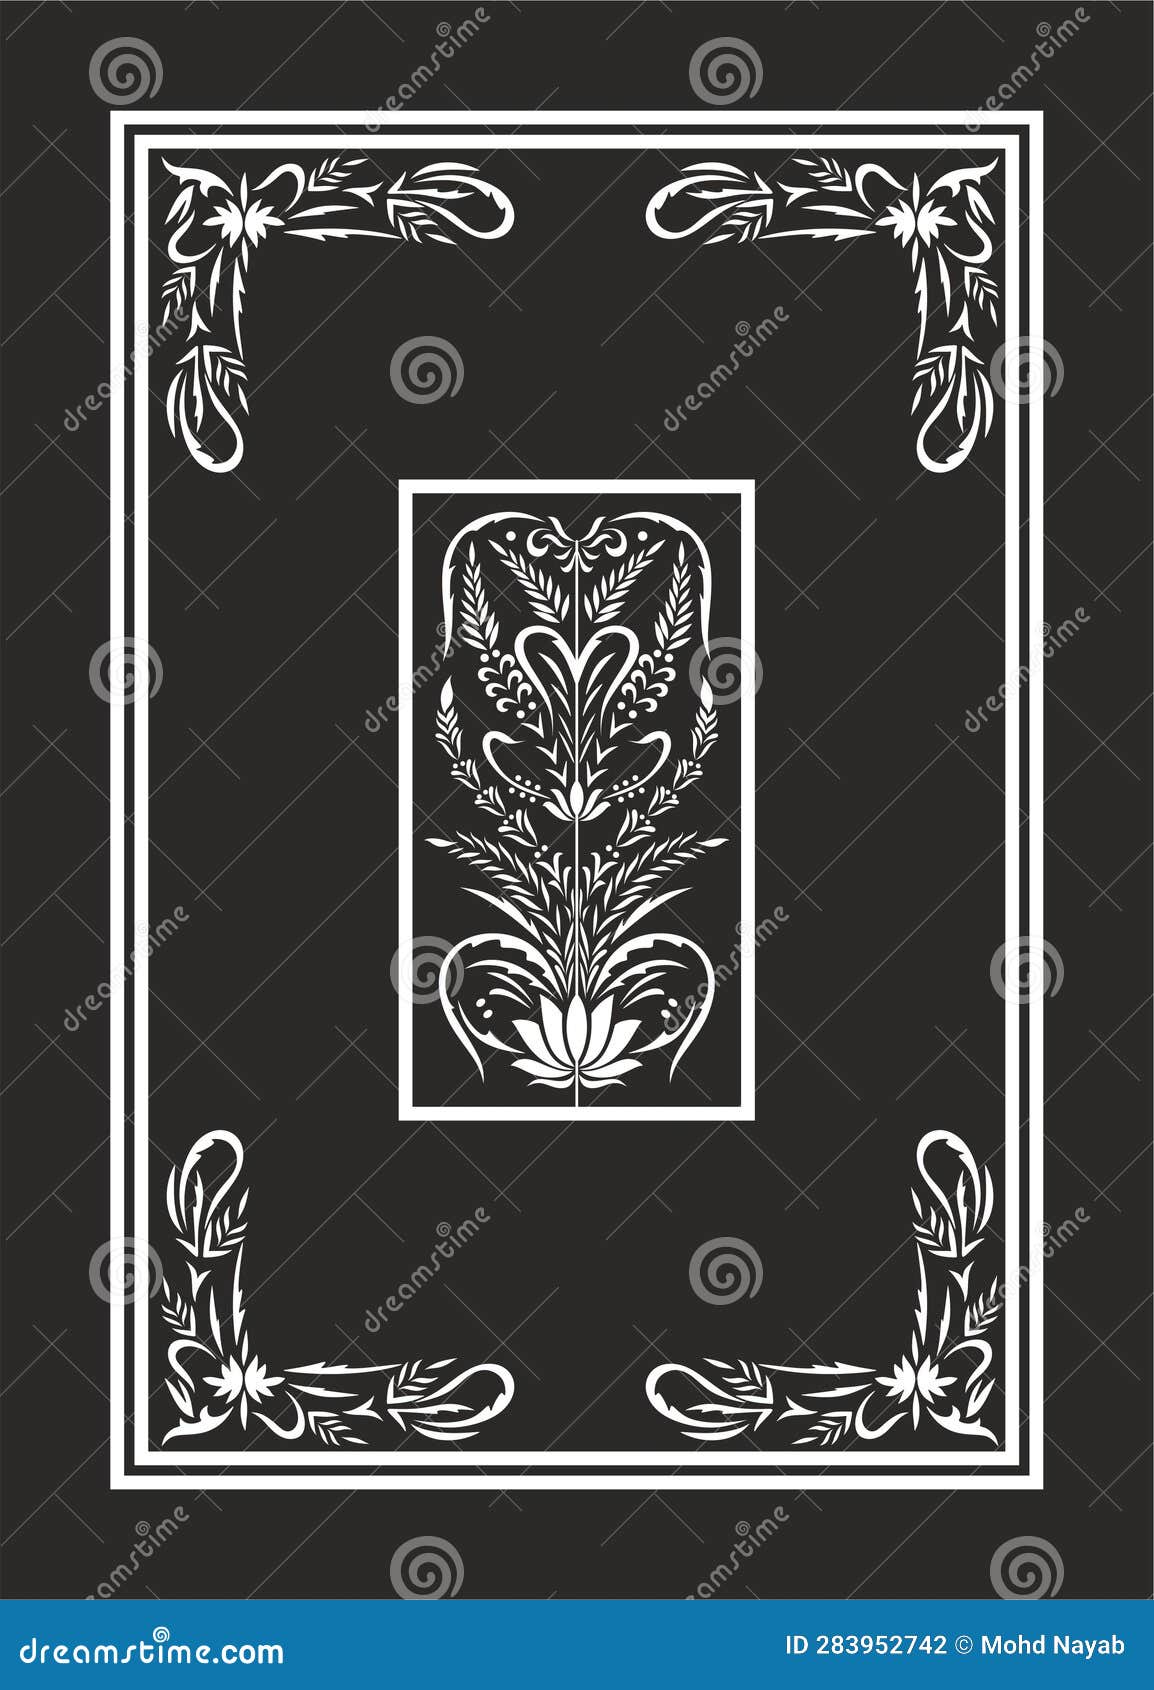 Glass Etching Patterns Vectors for Free Download